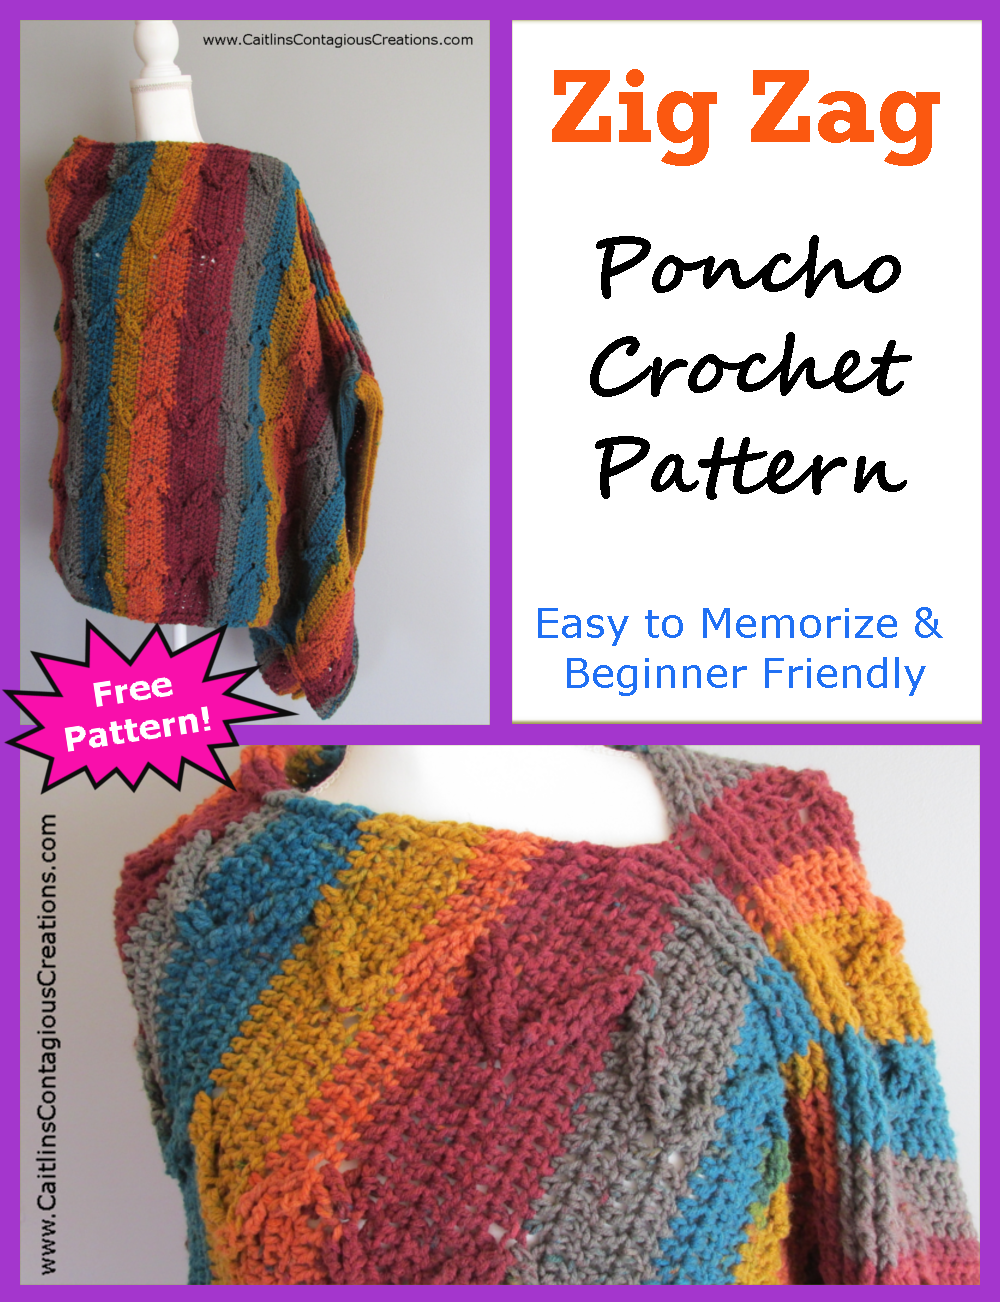 This fun, free poncho crochet pattern is wonderful for beginners and features a thick and warm zig zag texture perfect for autumn cool weather. Check it out now!